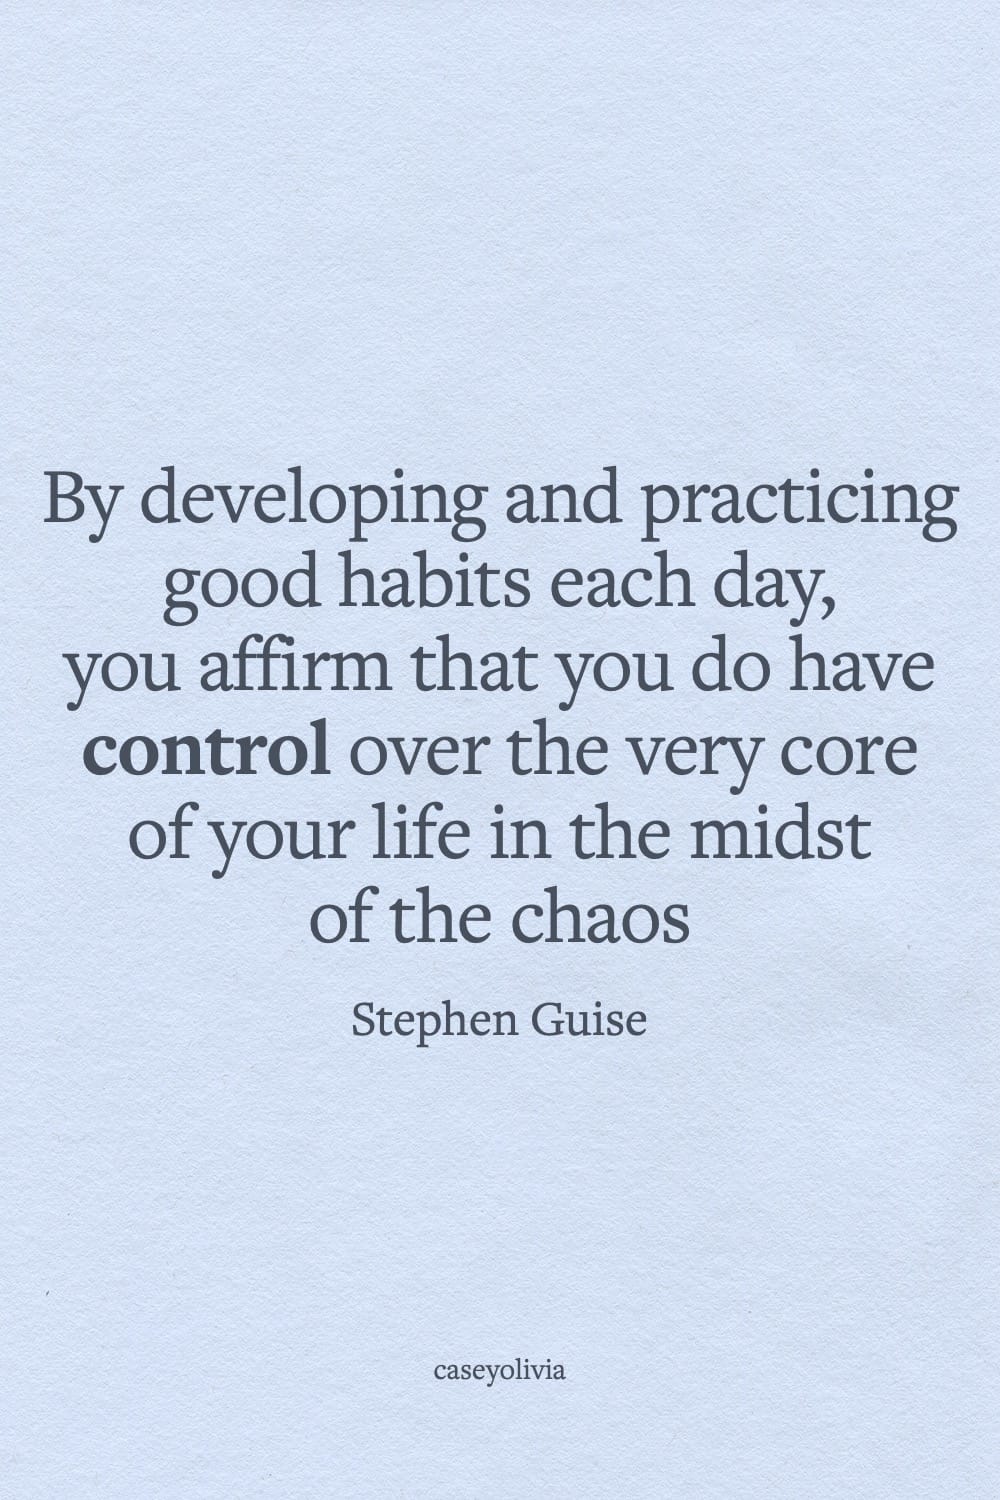 stephen guise developing and practicing good habits each day